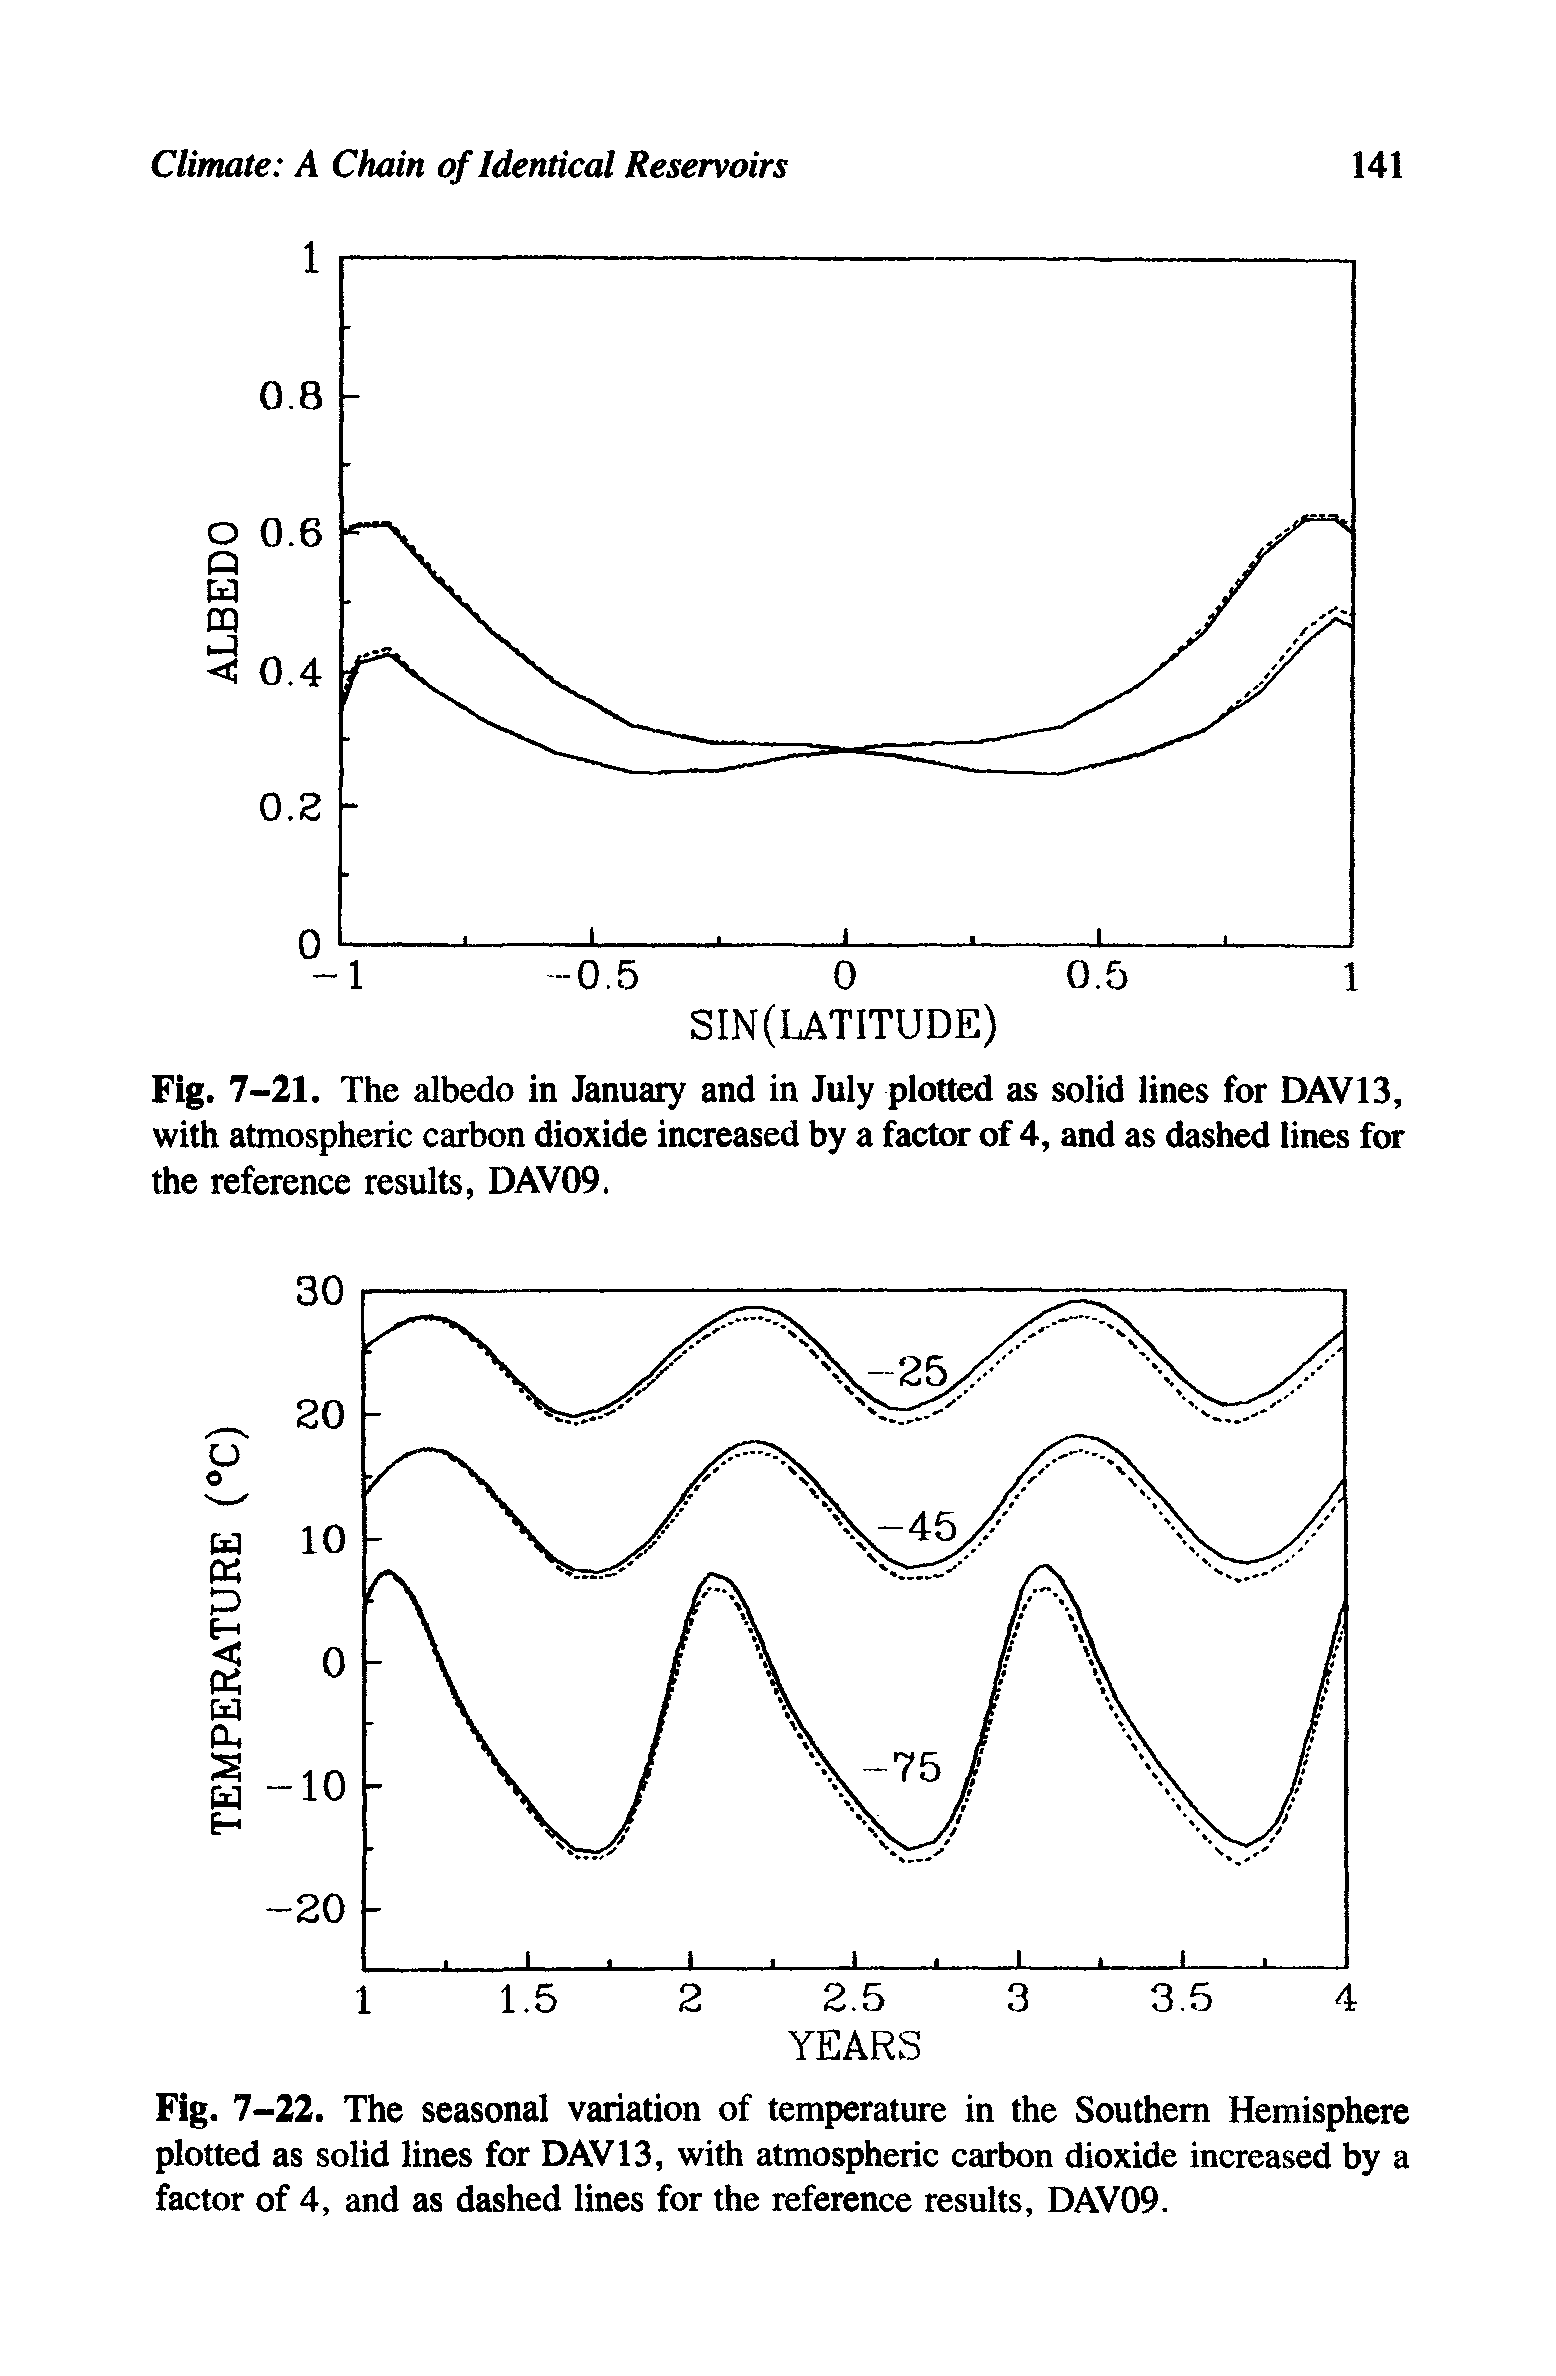 Fig. 7-21. The albedo in January and in July plotted as solid lines for DAV13, with atmospheric carbon dioxide increased by a factor of 4, and as dashed lines for the reference results, DAV09.